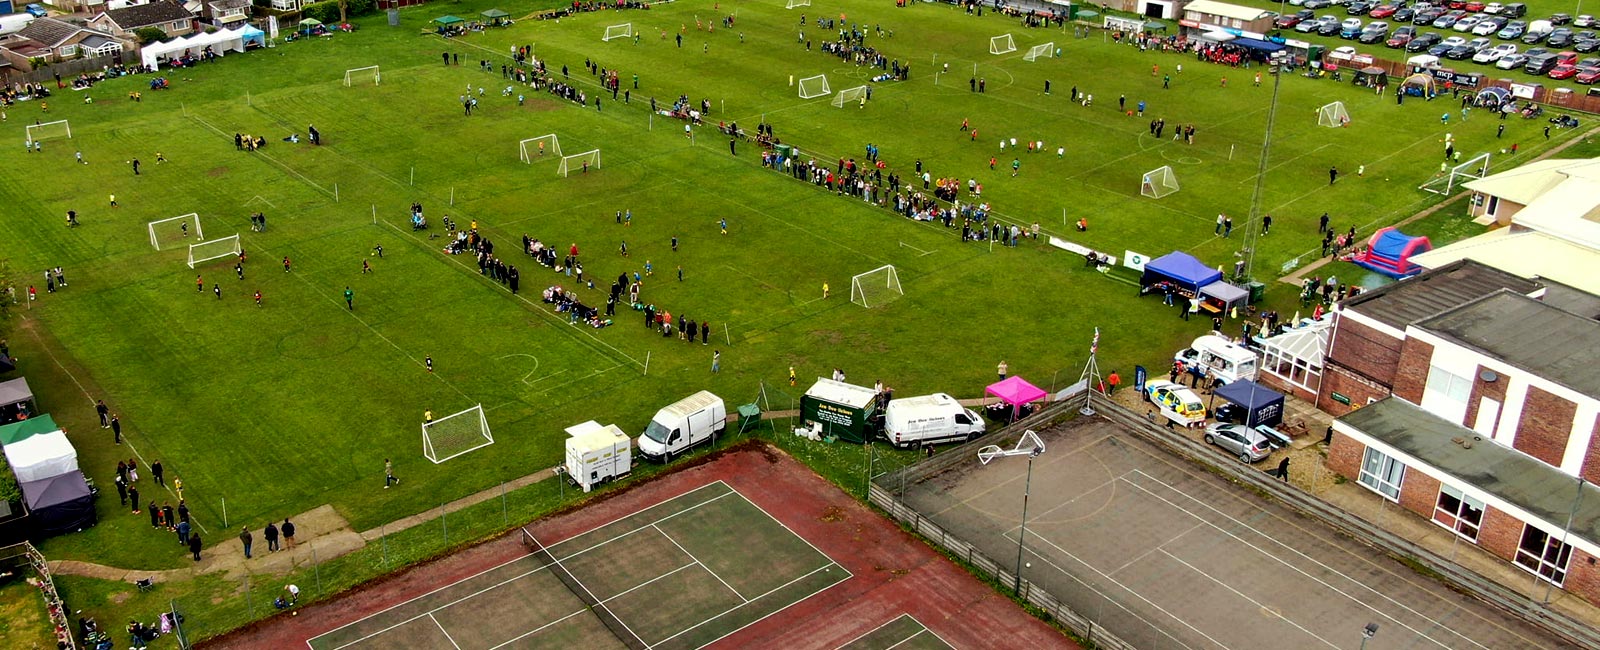 Aerial view showing some of the many different pitches at Watton Sports Centre.